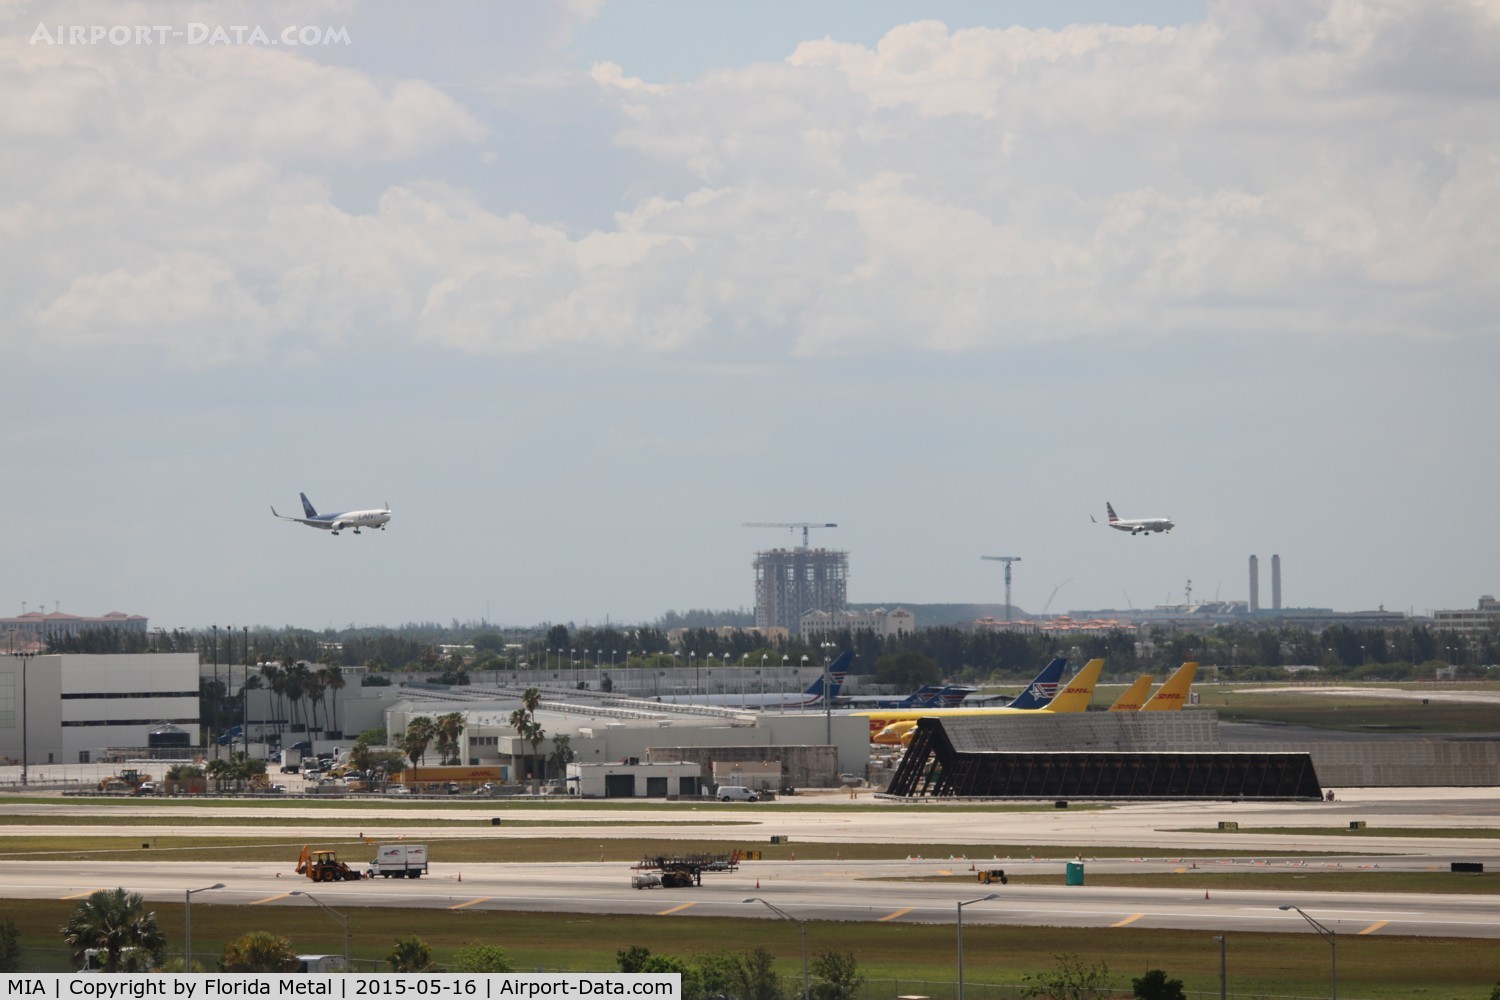 Miami International Airport (MIA) - Runway 9 being worked on while parallel landings occurring on 8L and R